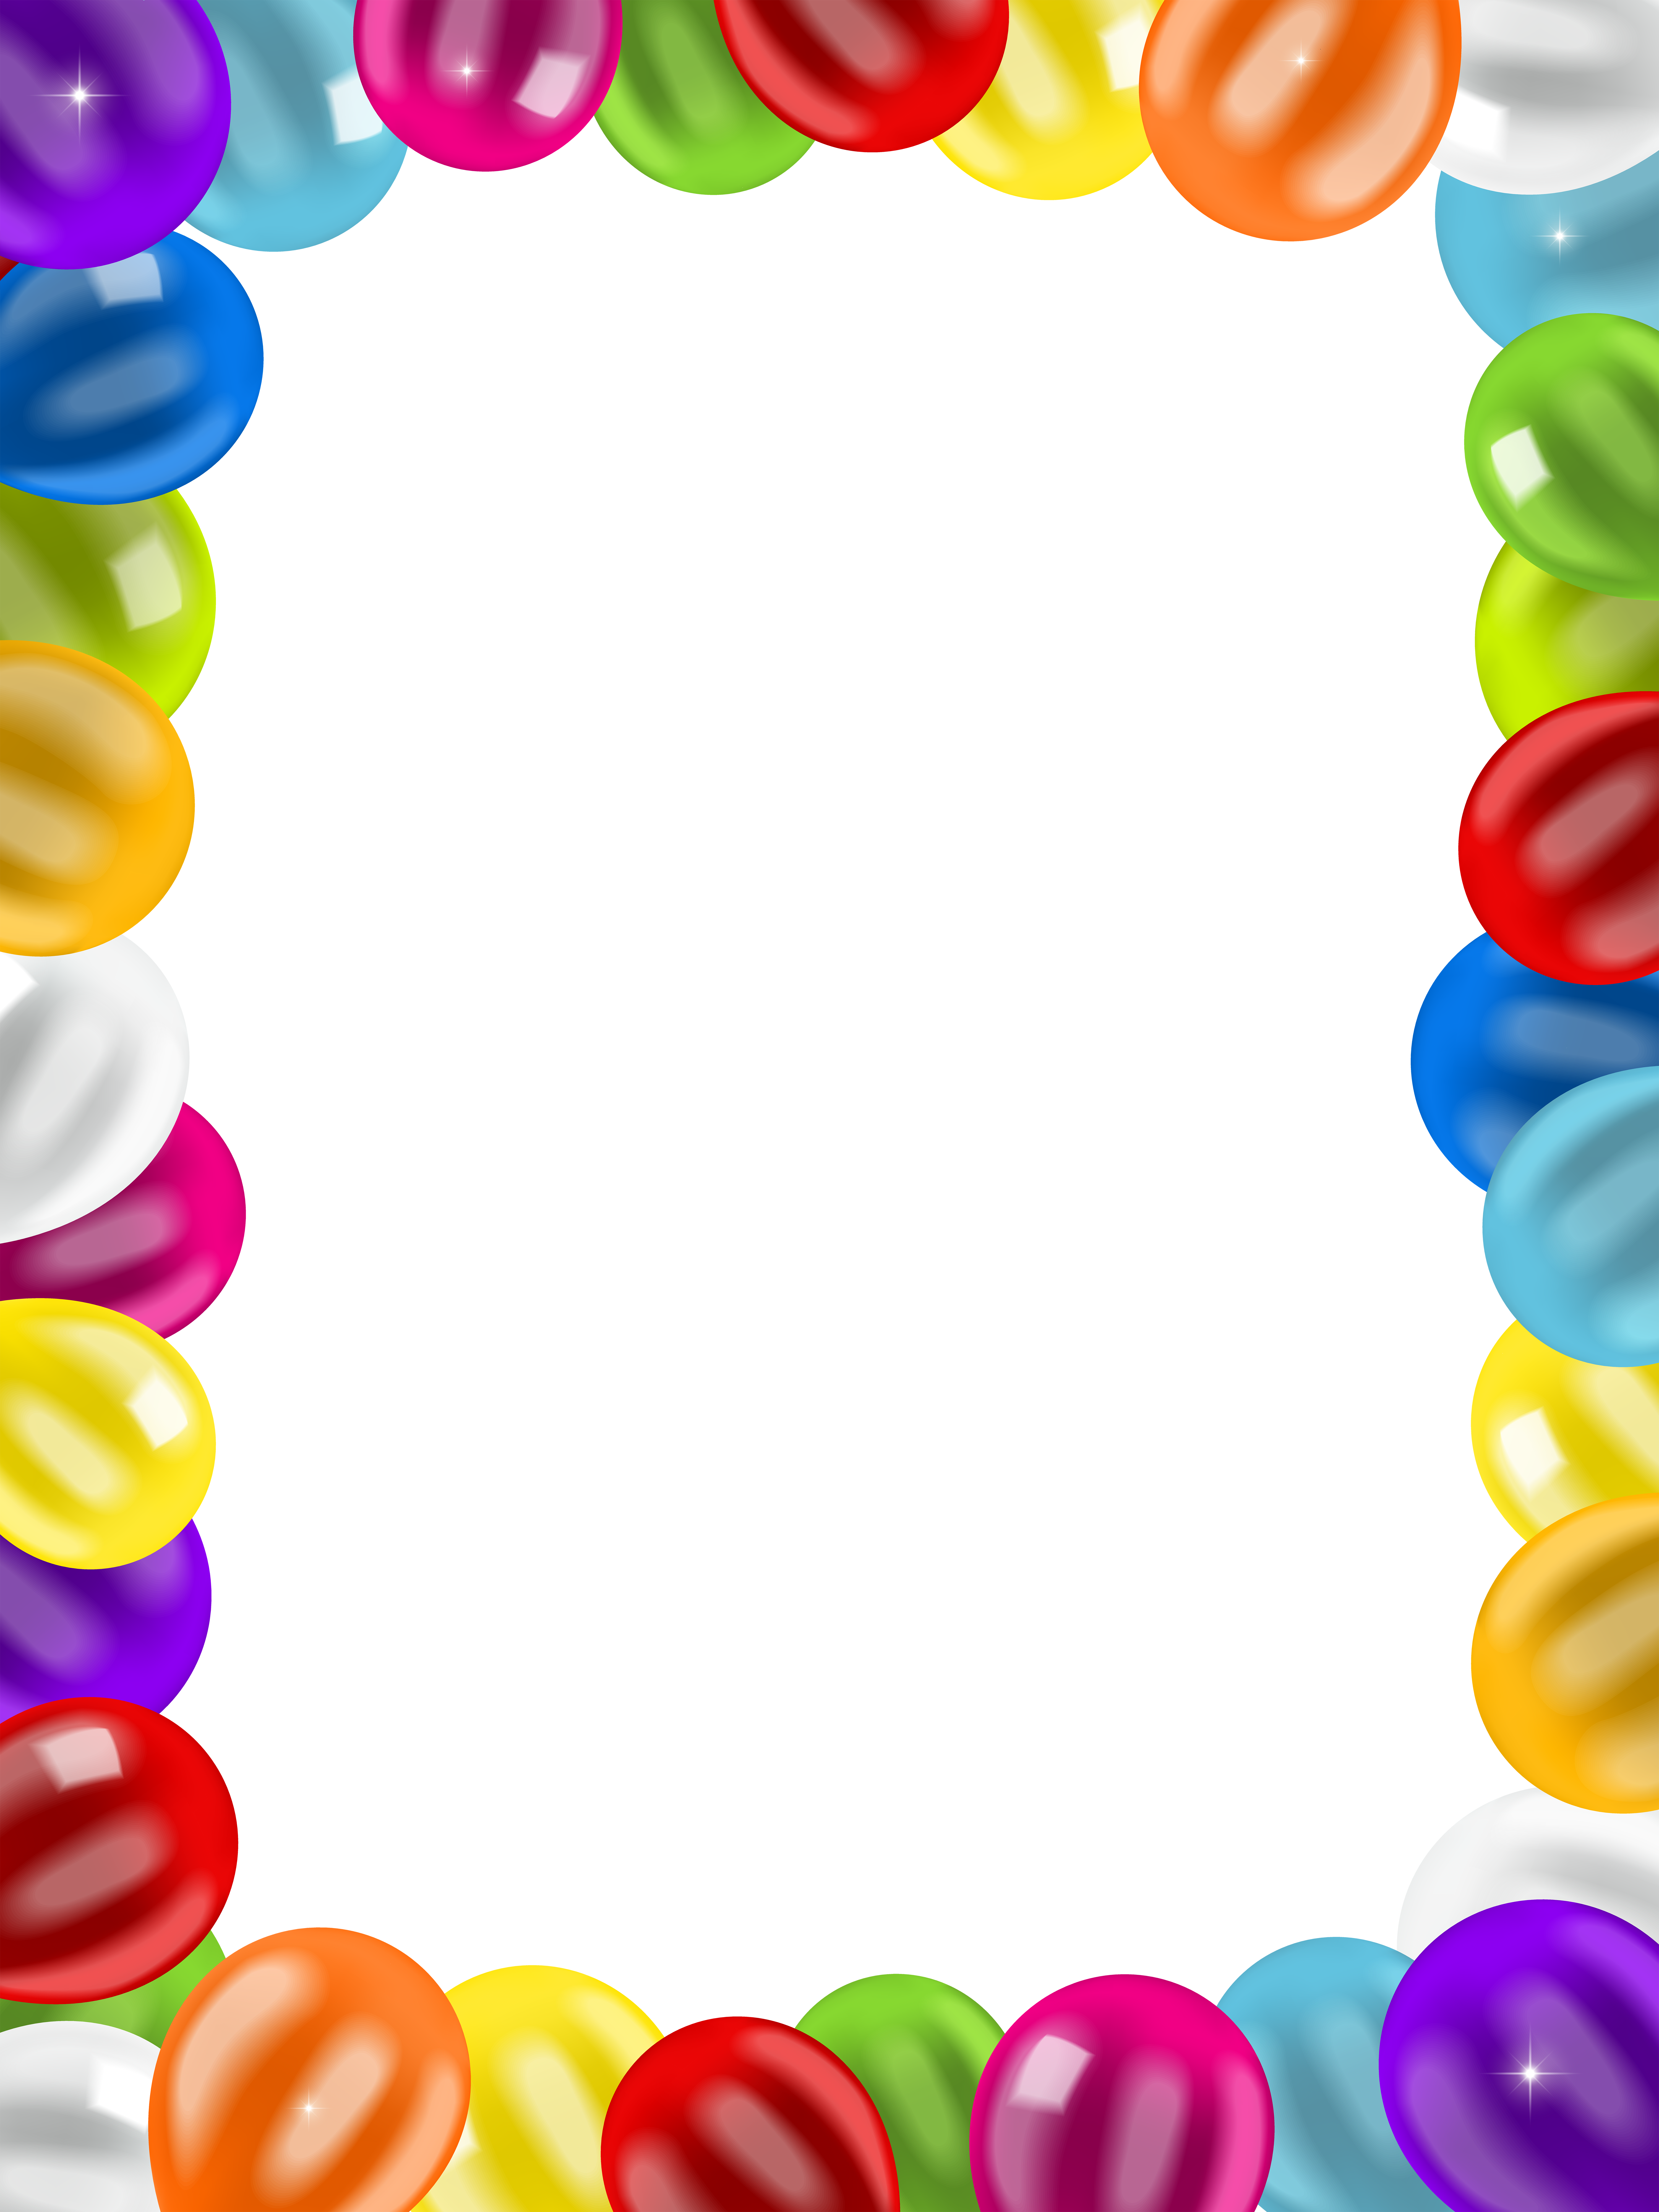 Balloons Border Frame Png Clip Art Image Gallery Yopriceville High Quality Images And Transparent Png Free Clipart